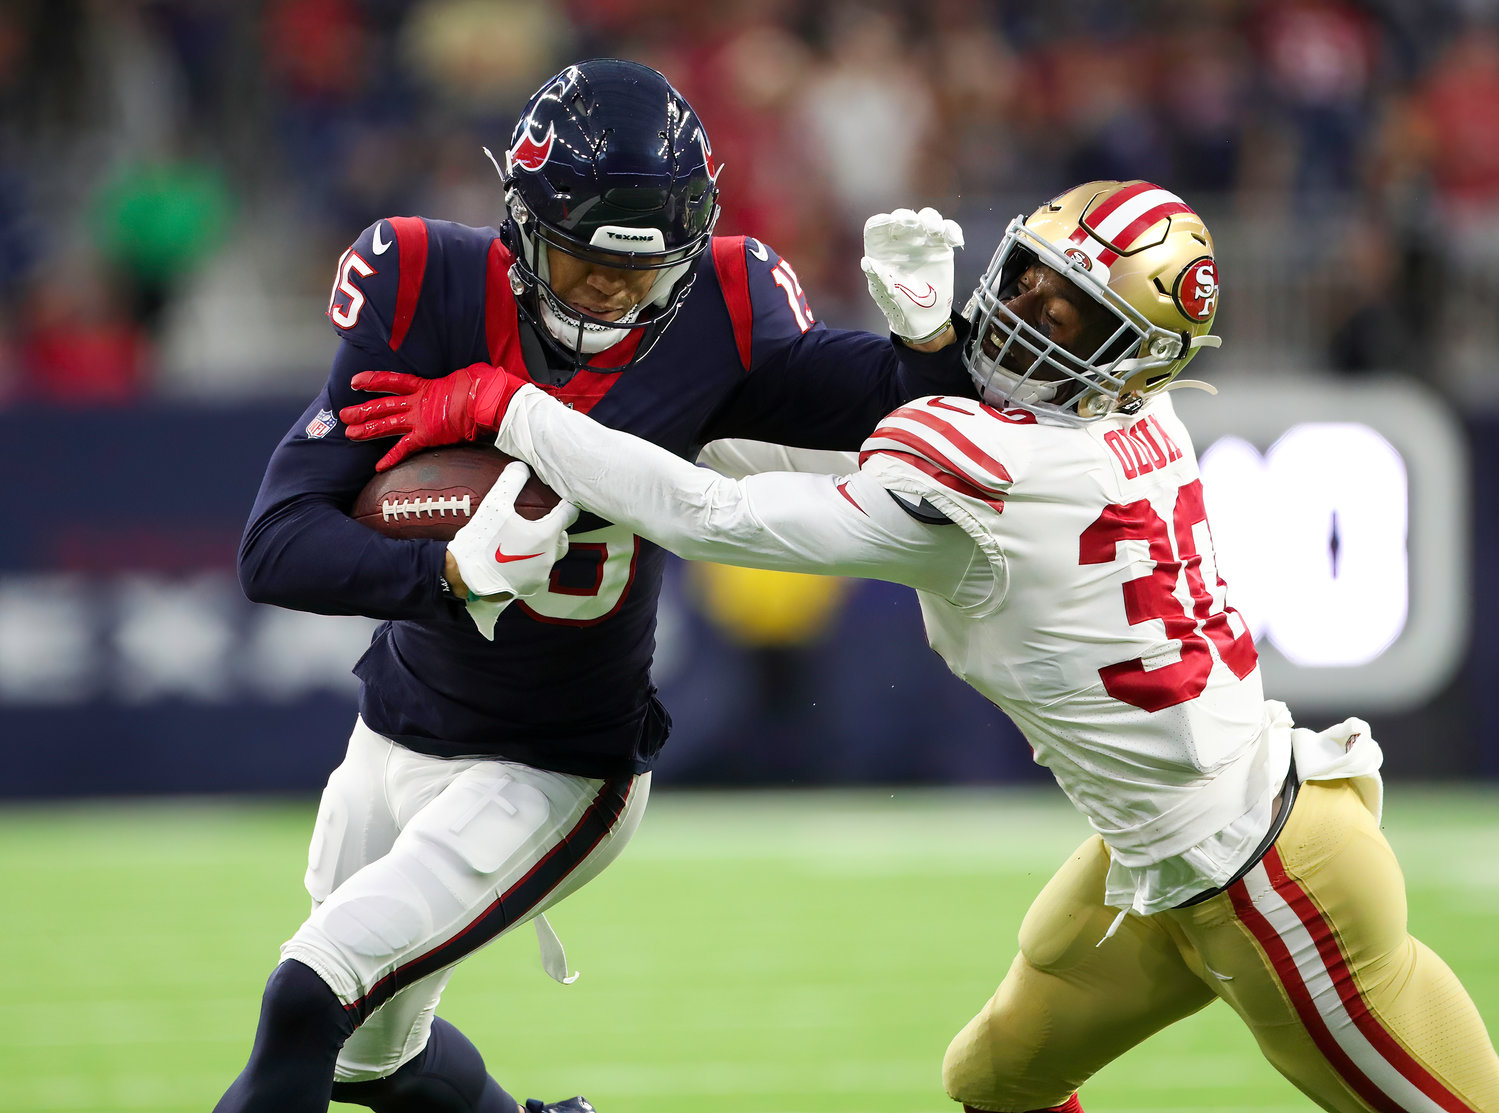 Houston Texans wide receiver Chris Moore (15) fends off a tackle attempt by San Francisco 49ers safety George Odum (30) during an NFL preseason game between the Texans and the 49ers in Houston, Texas, on August 25, 2022.